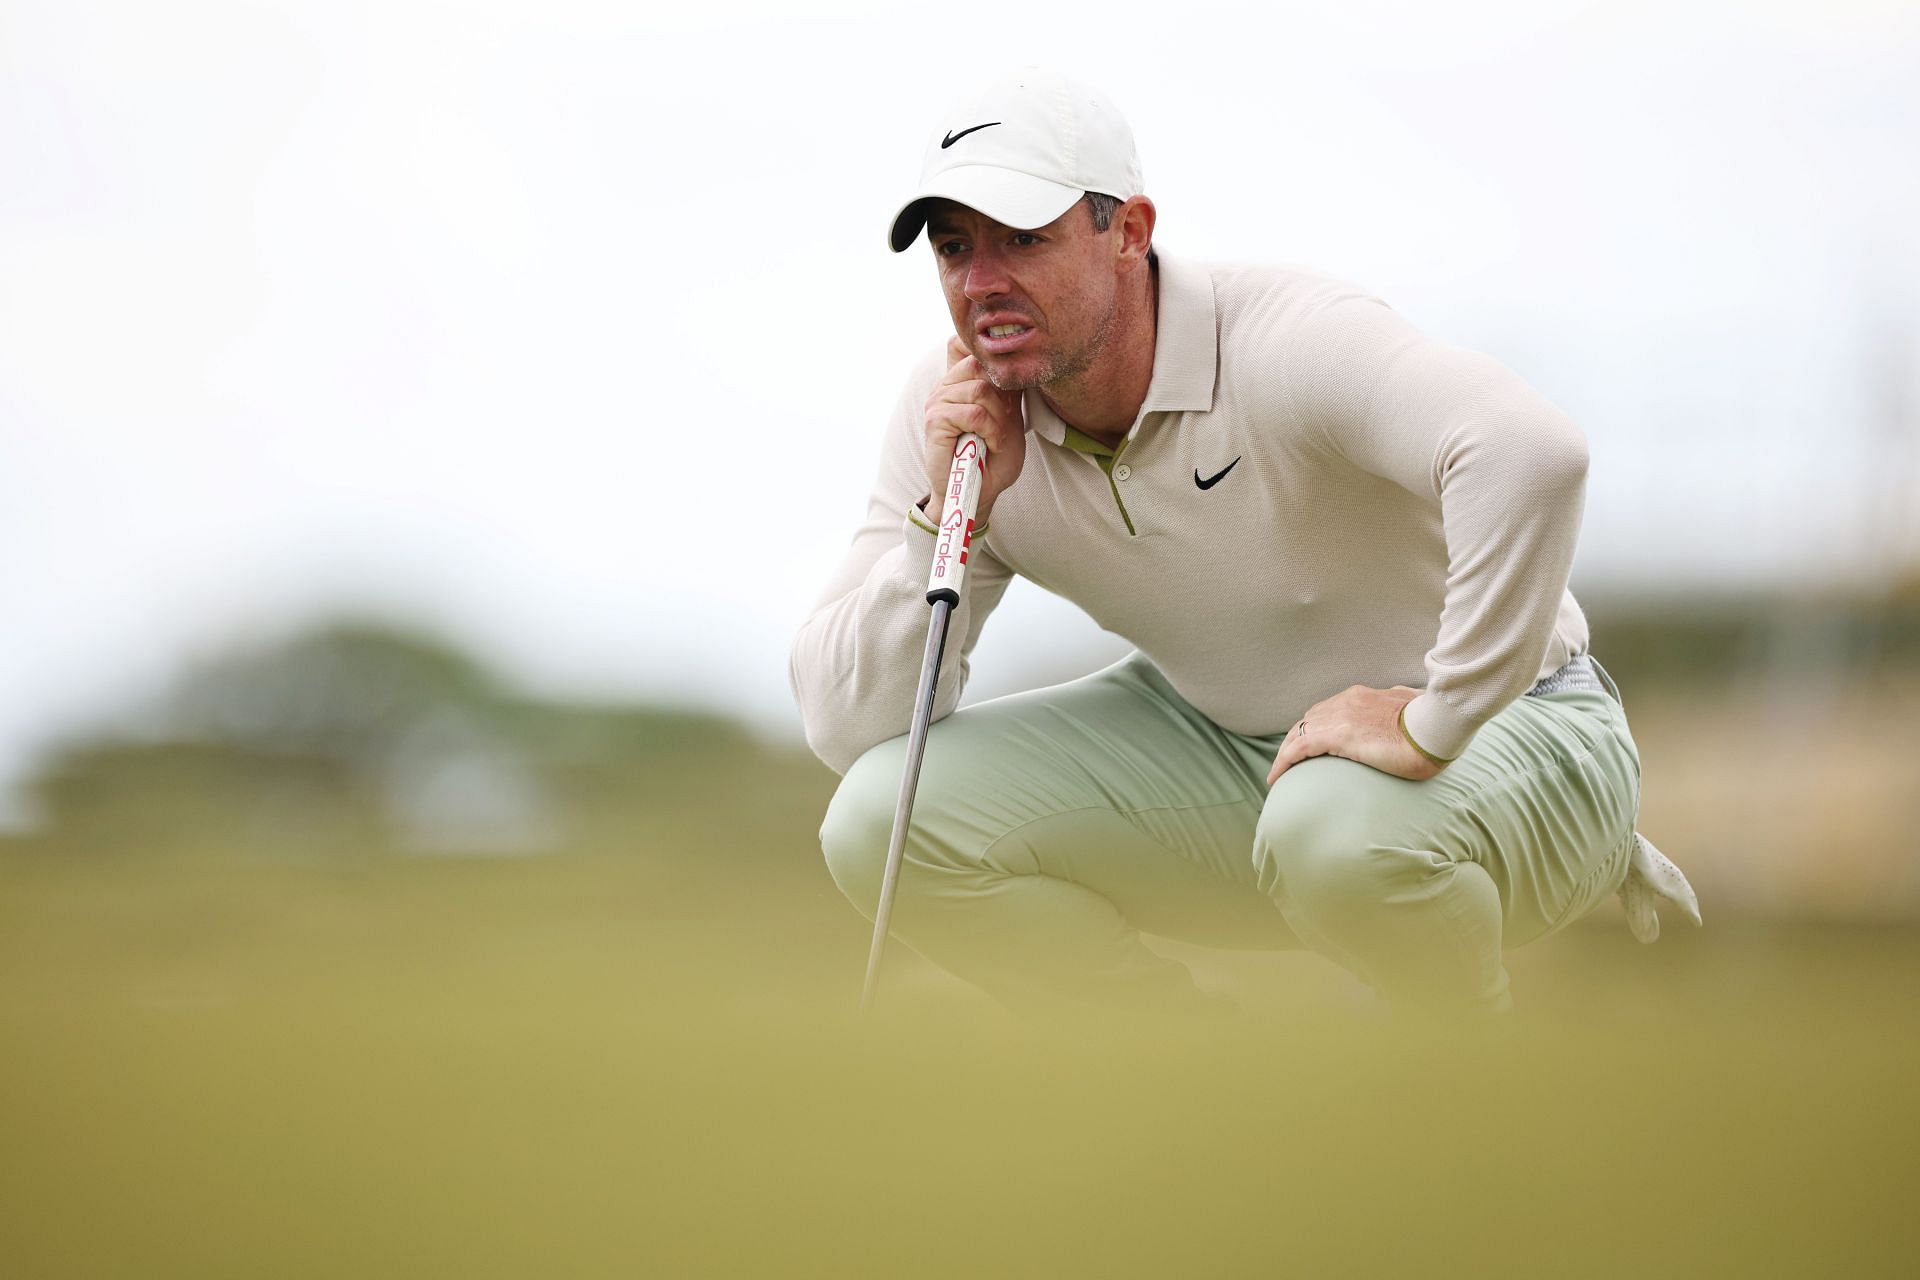 Rory Mcllroy at the Genesis Scottish Open (Image via Getty)